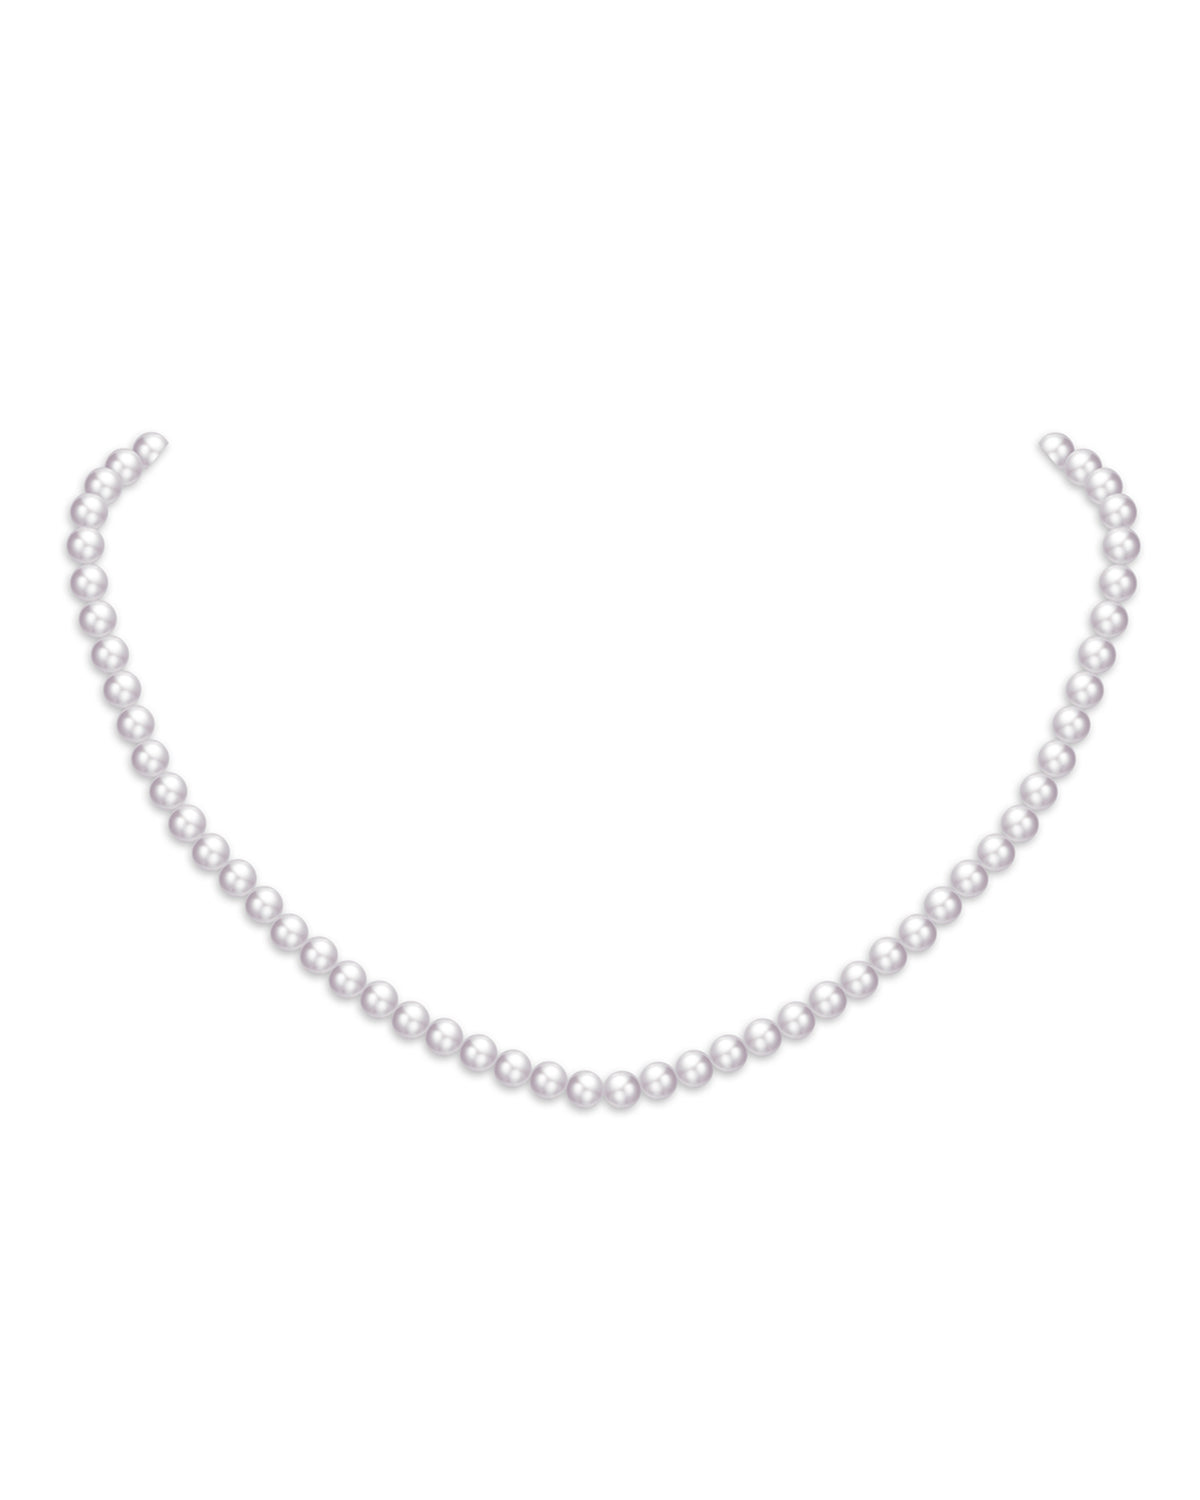 3.0-4.5mm White Freshwater Graduated Pearl Necklace-AAAA Quality